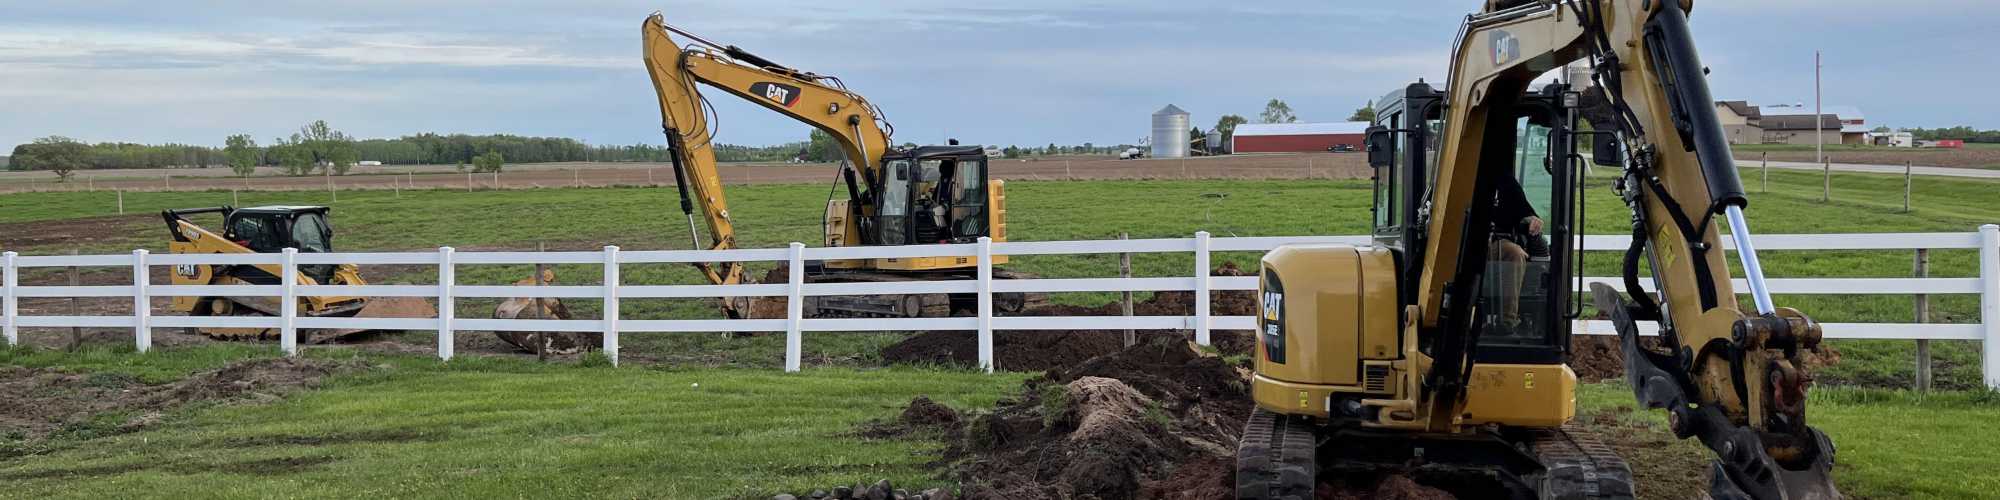 2 backhoes and a skid steer working on a farm field